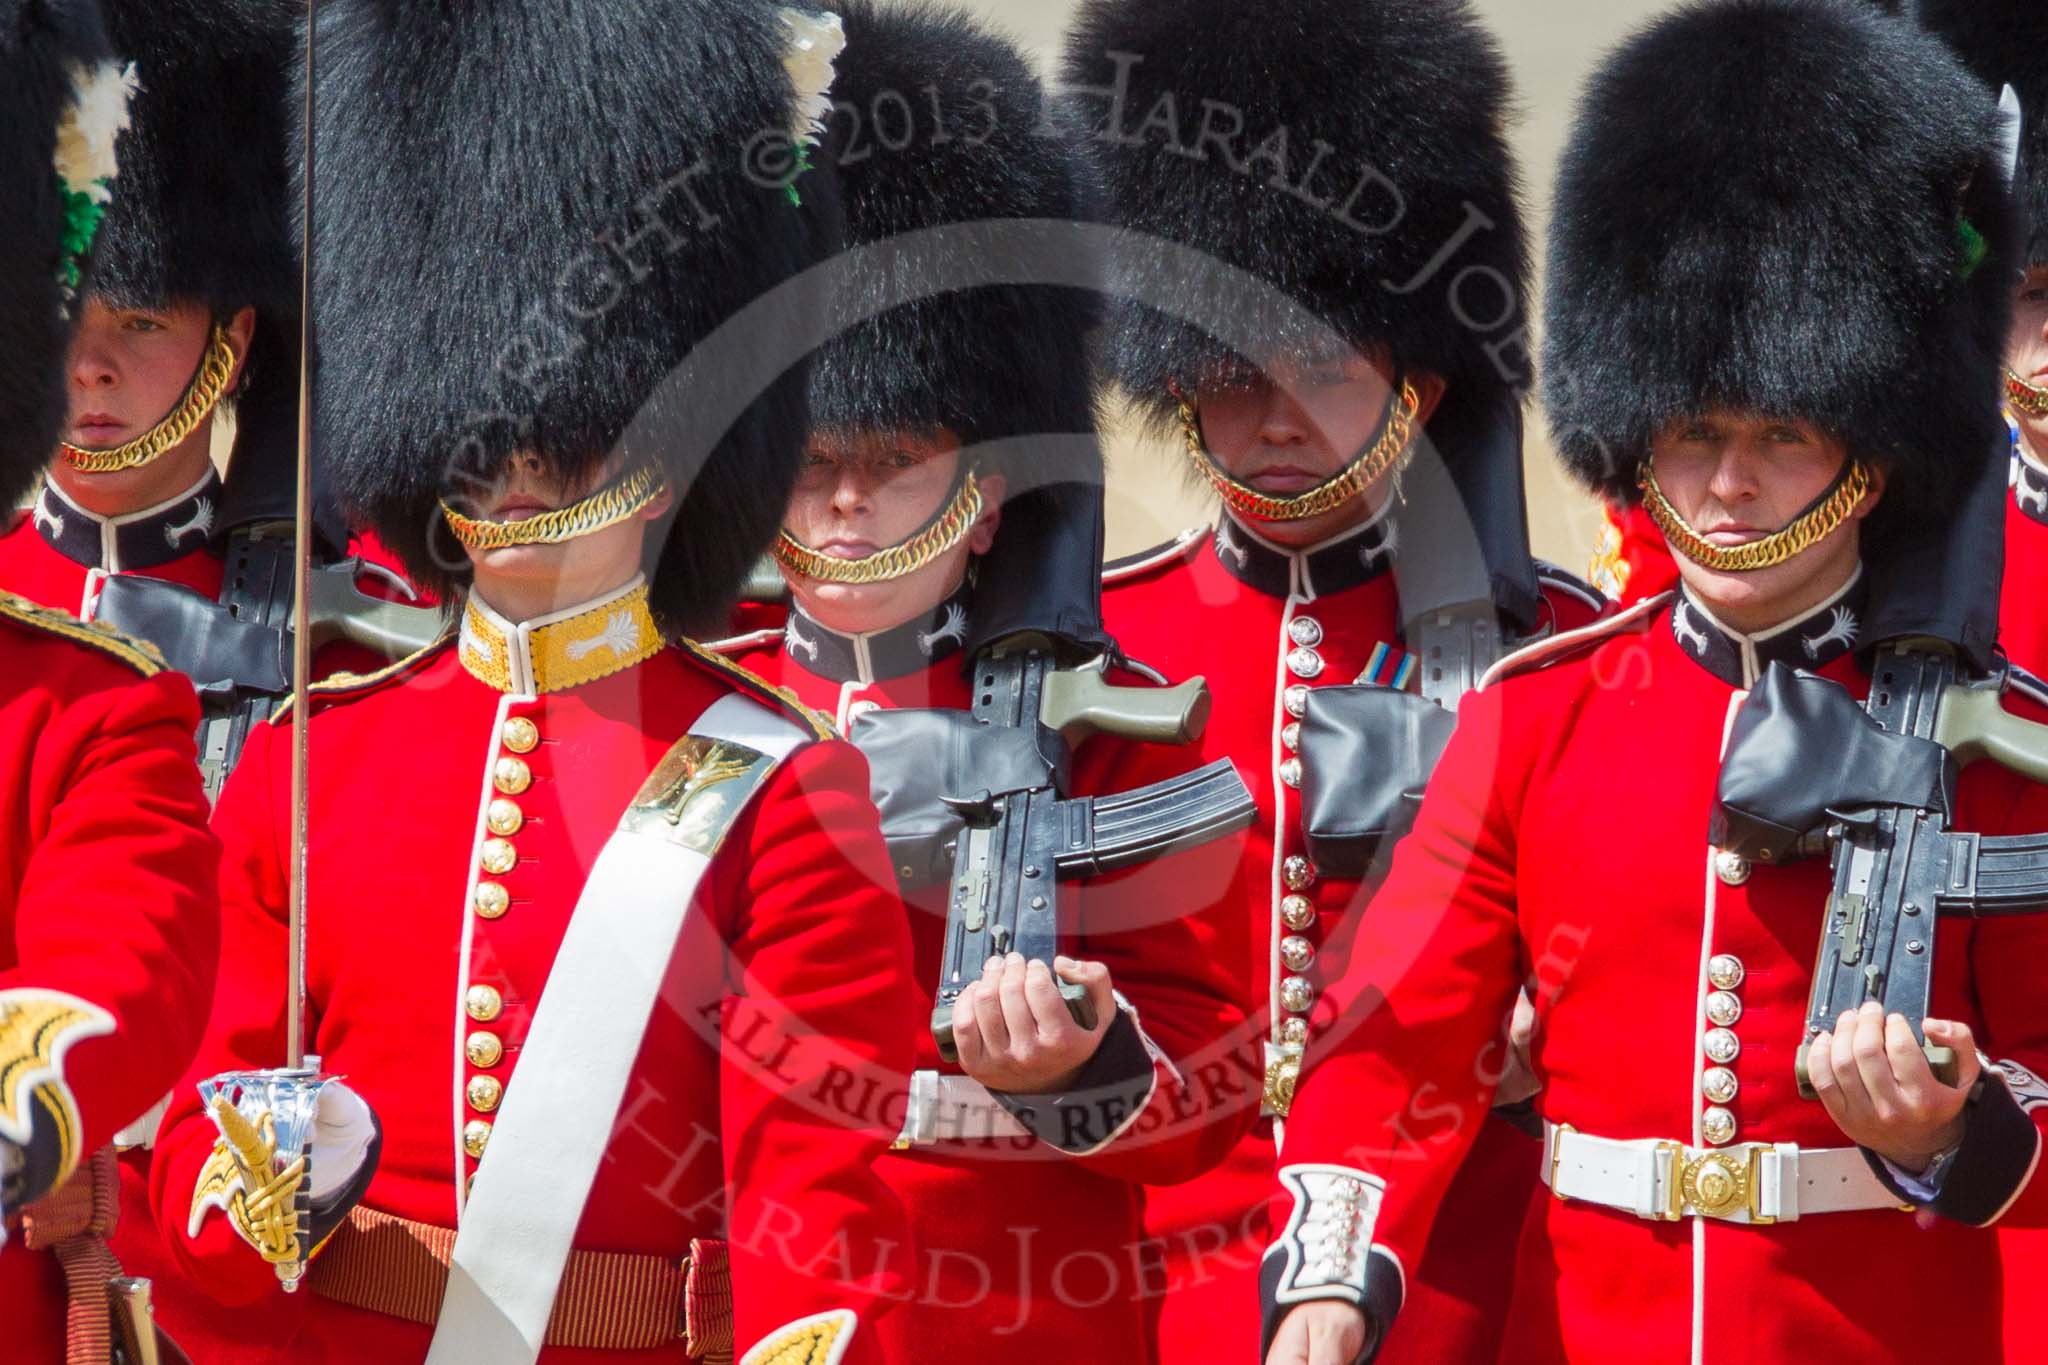 The Colonel's Review 2015.
Horse Guards Parade, Westminster,
London,

United Kingdom,
on 06 June 2015 at 11:16, image #293